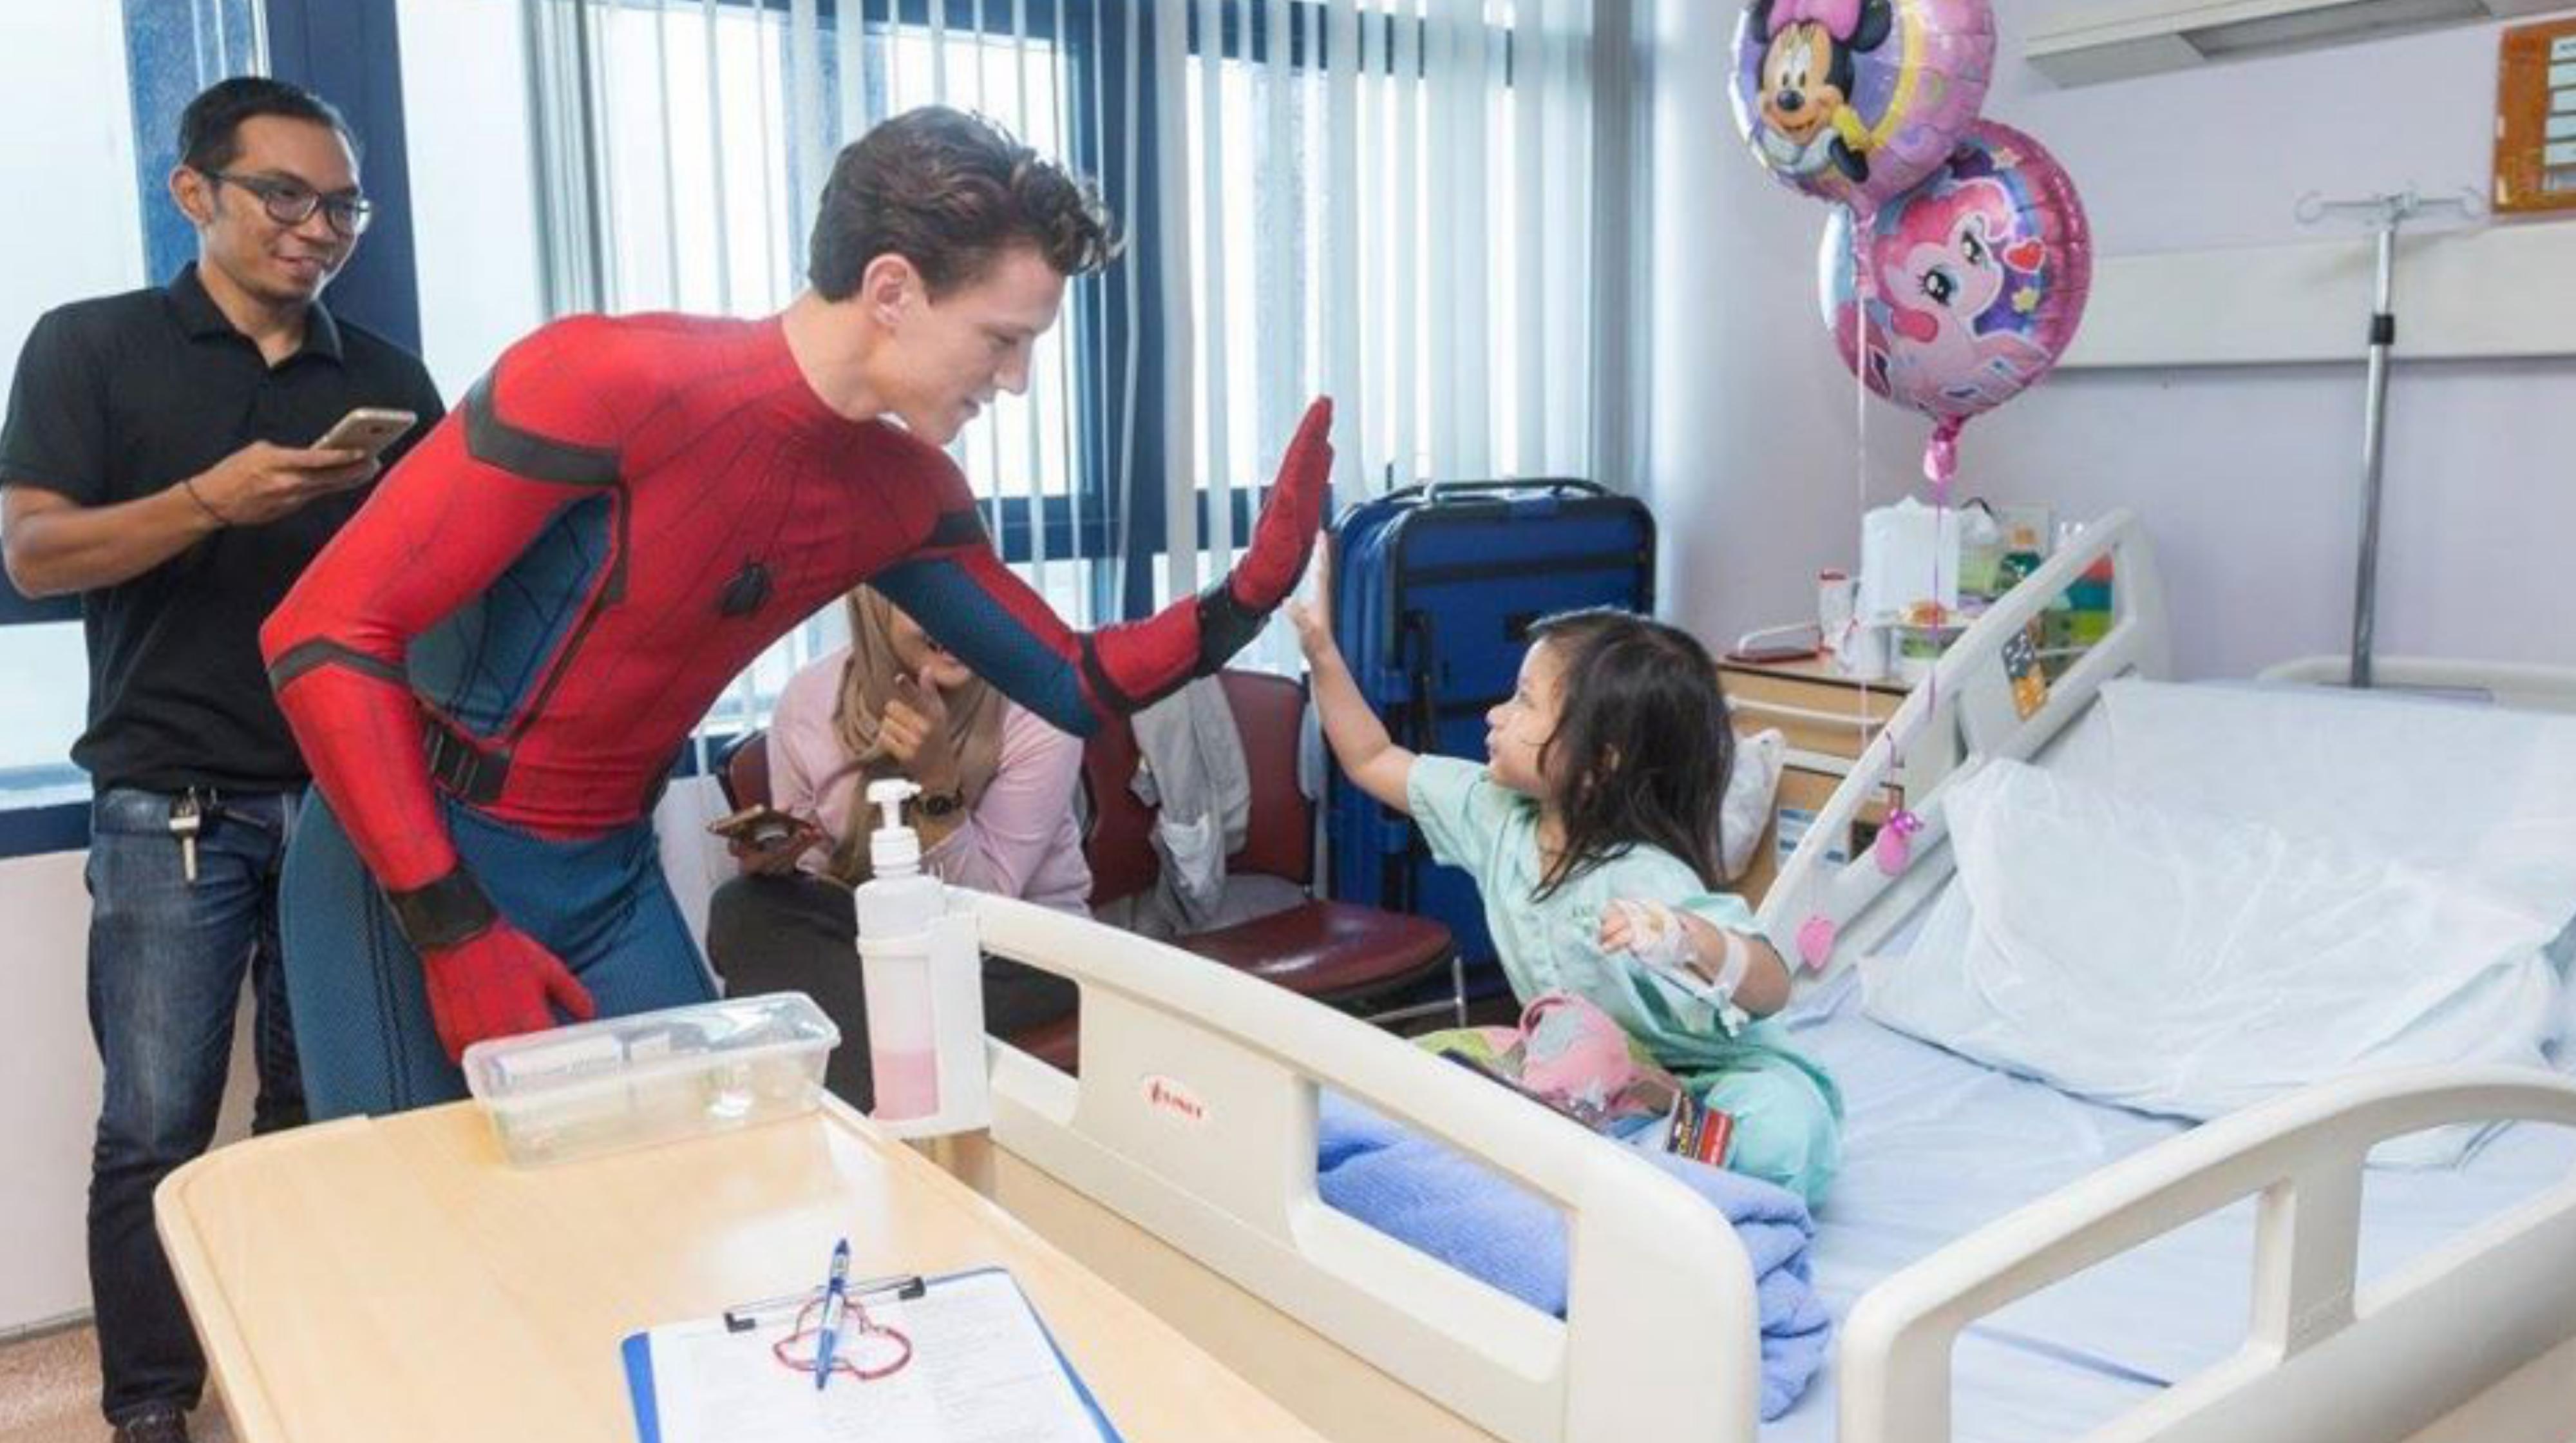 Spider-Man" star Tom Holland visits patients at KK Hospital while in S'pore  - Mothership.SG - News from Singapore, Asia and around the world